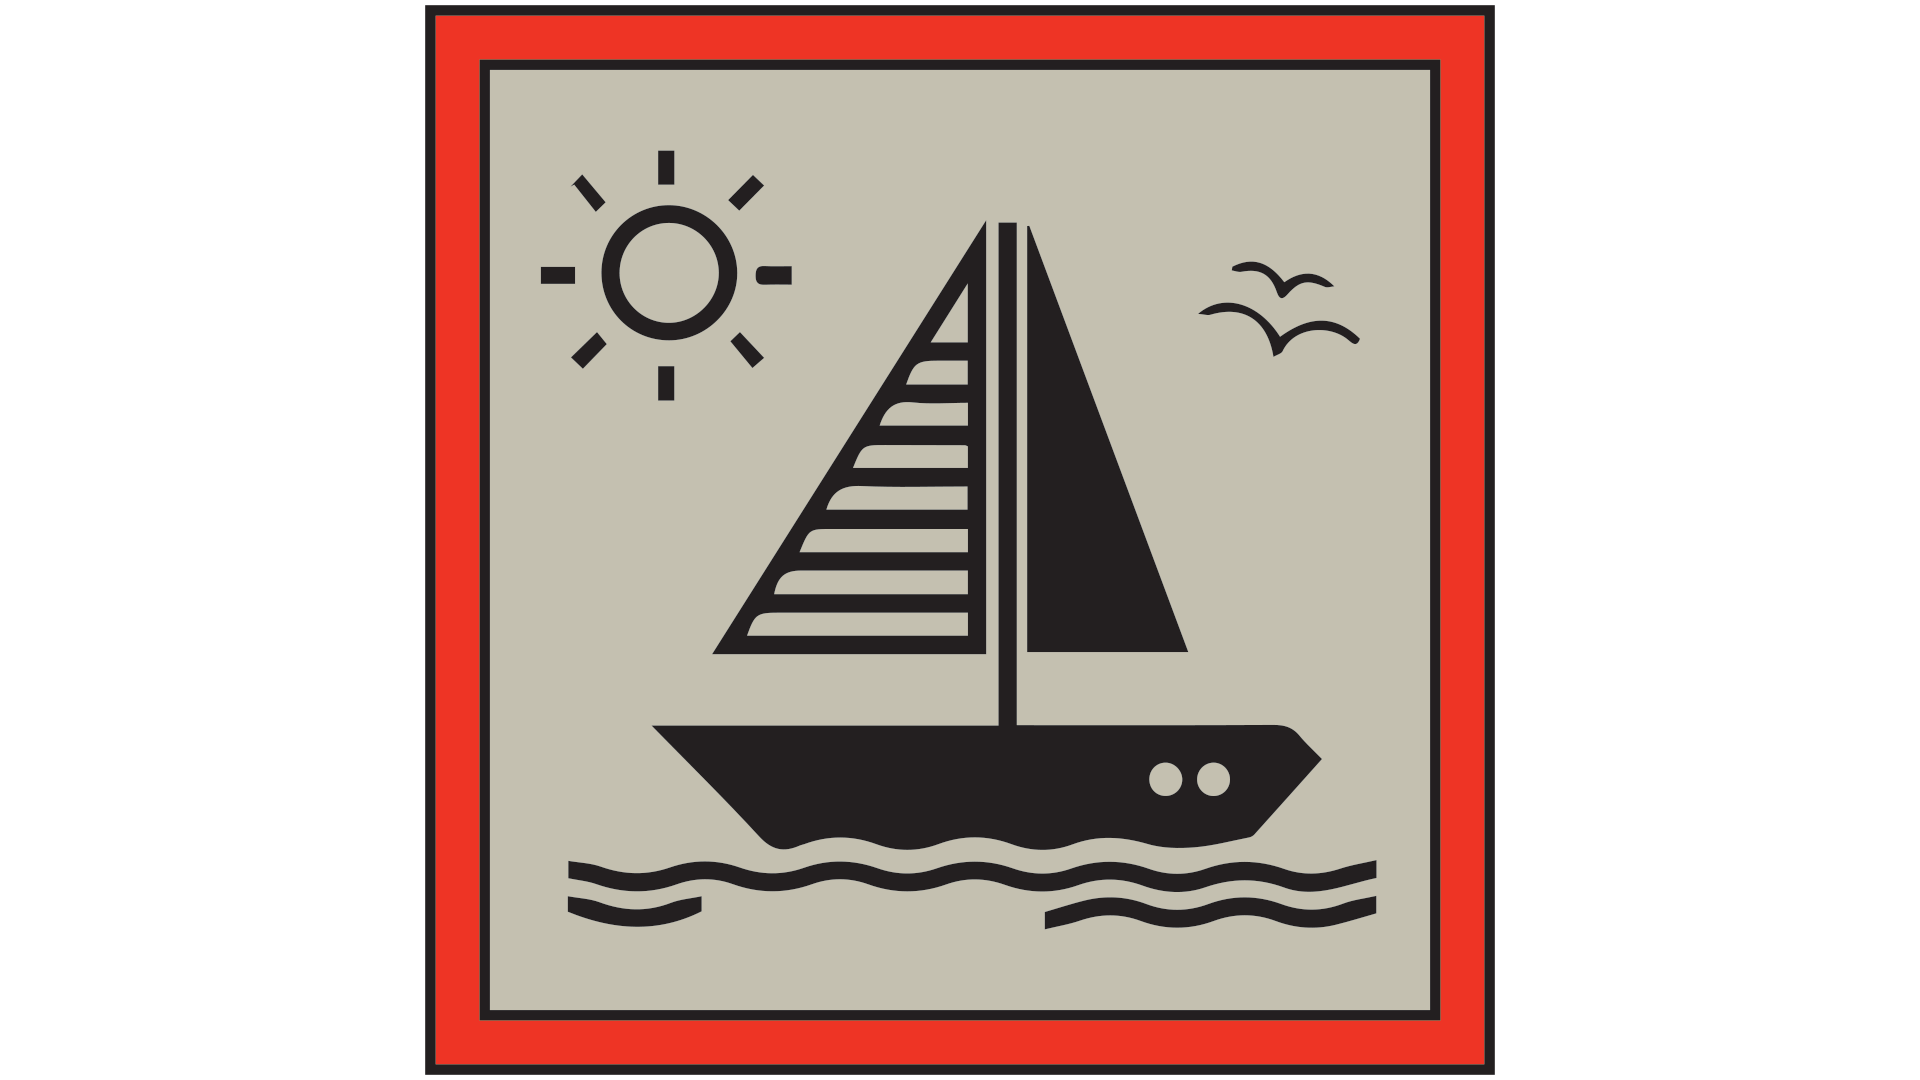 Icon for I'm On A Boat